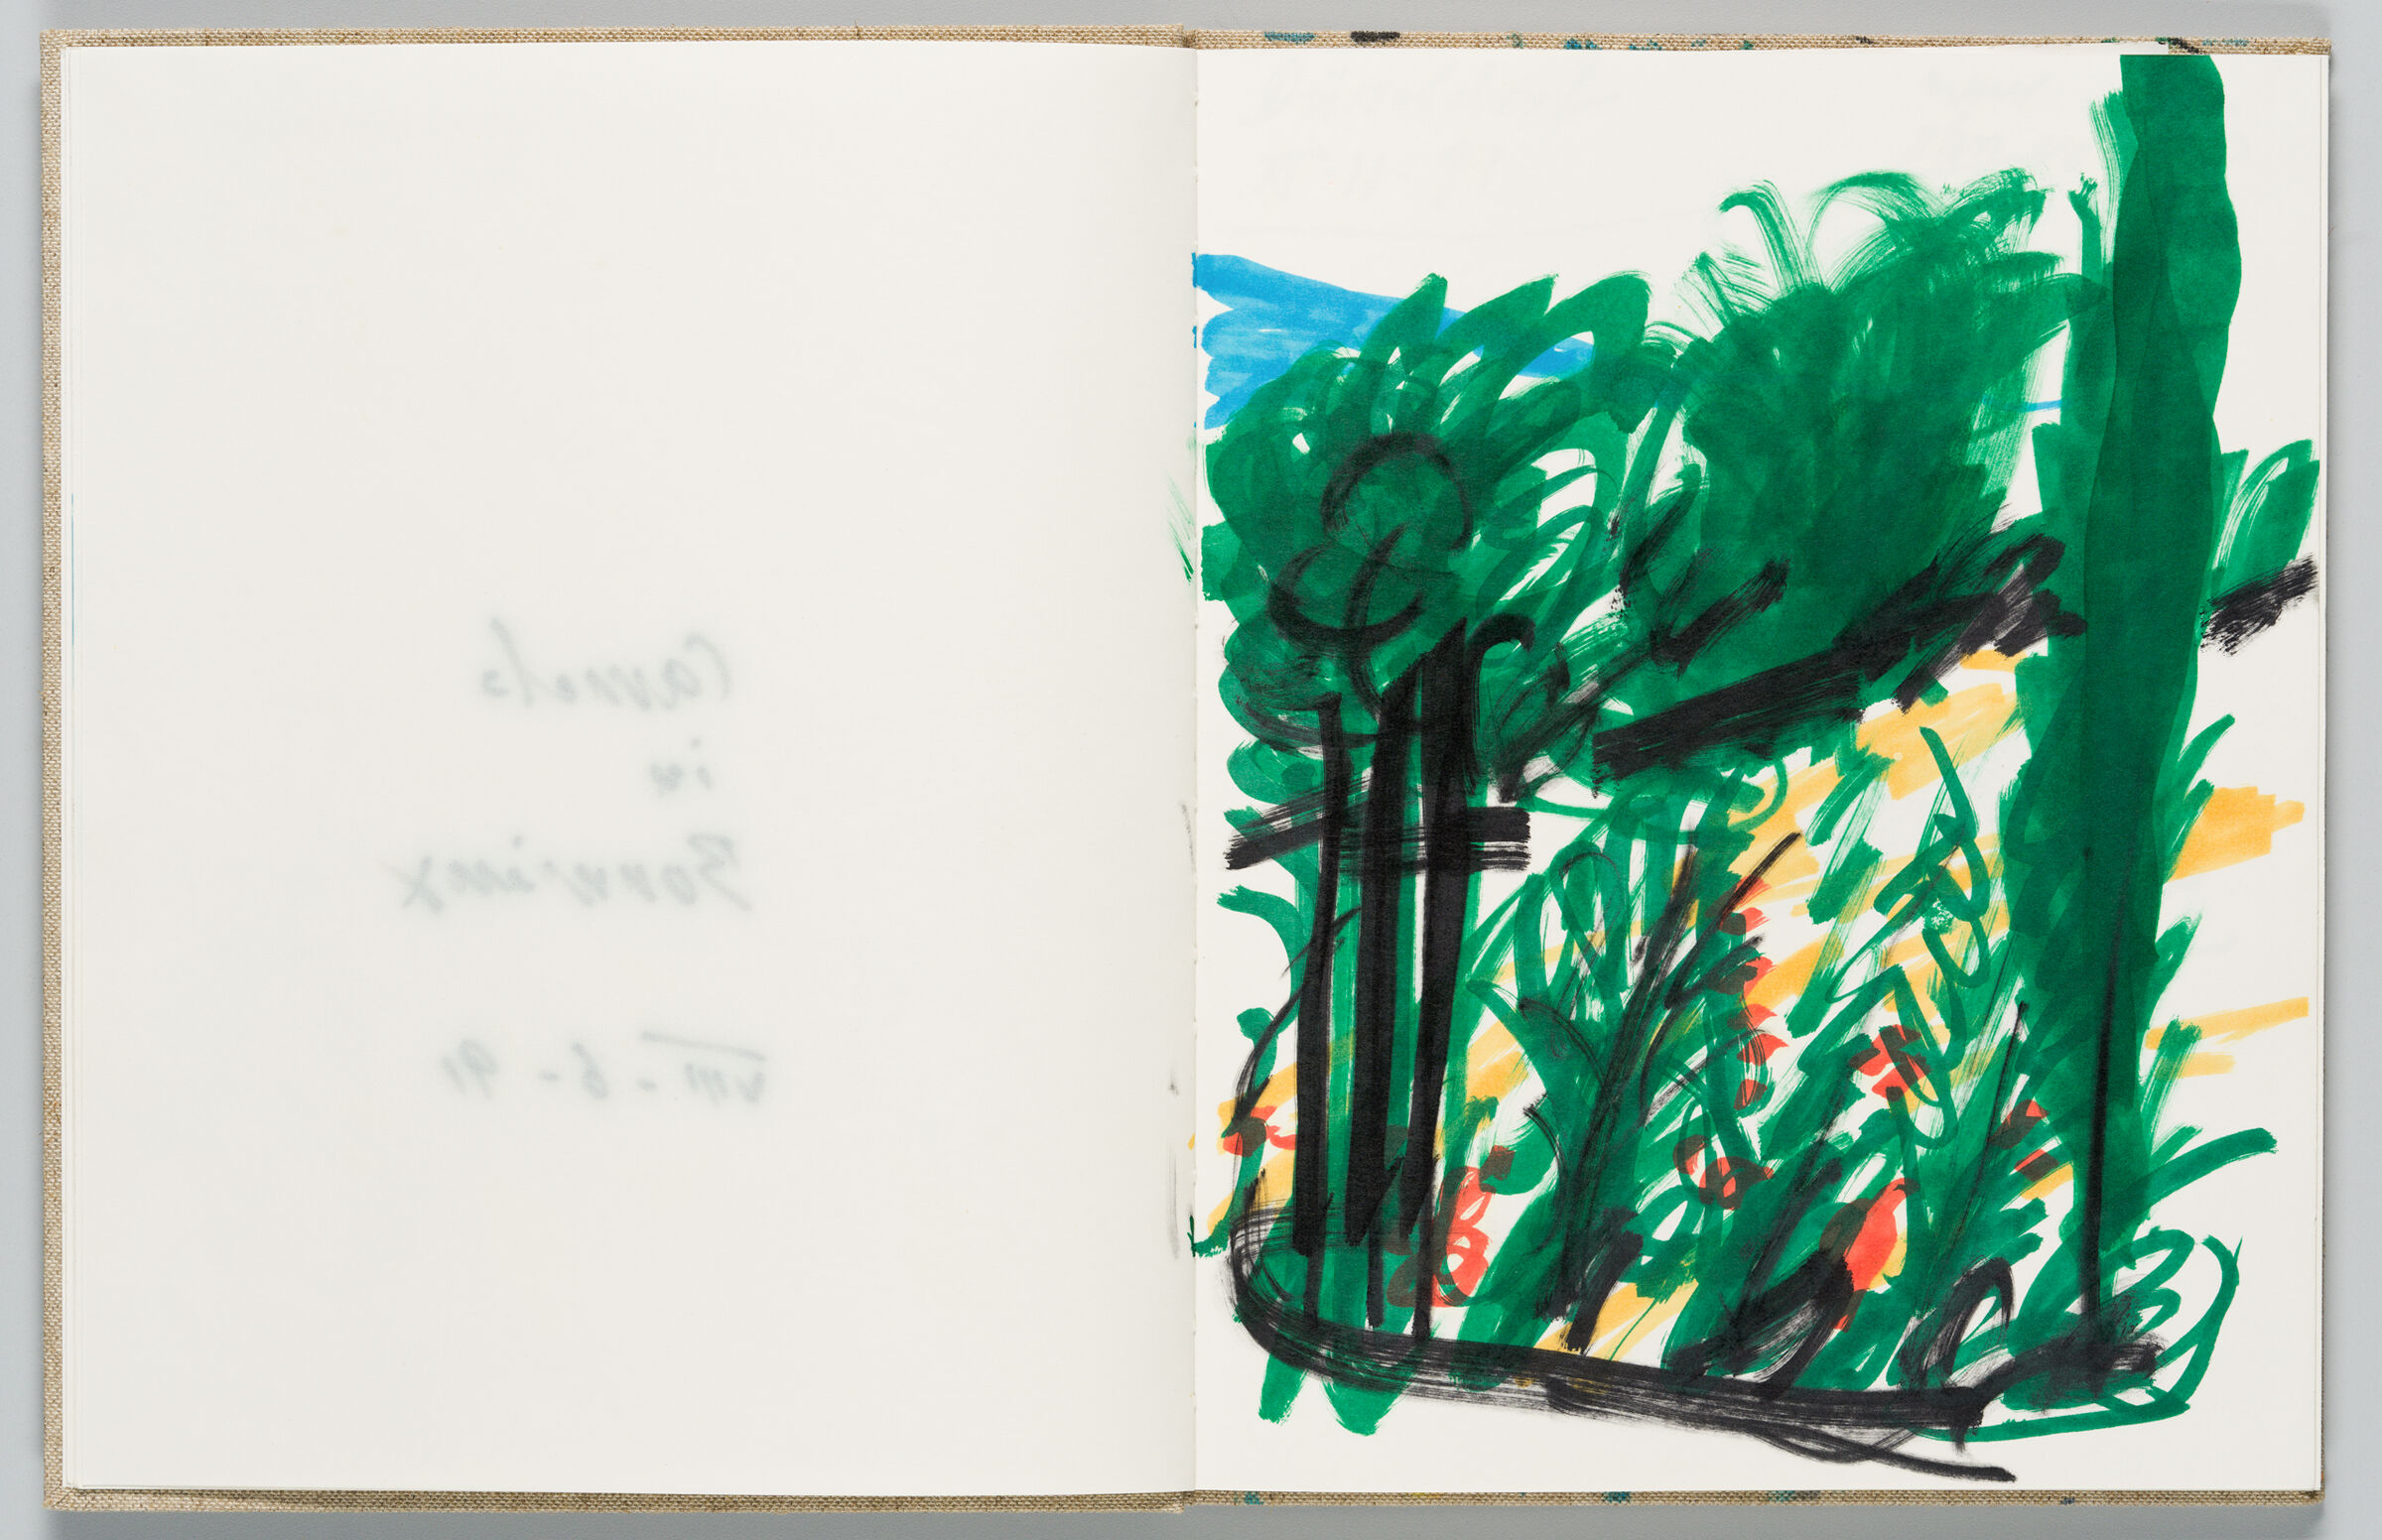 Untitled (Bleed-Through Of Previous Page, Left Page); Untitled (Landscape, Right Page)